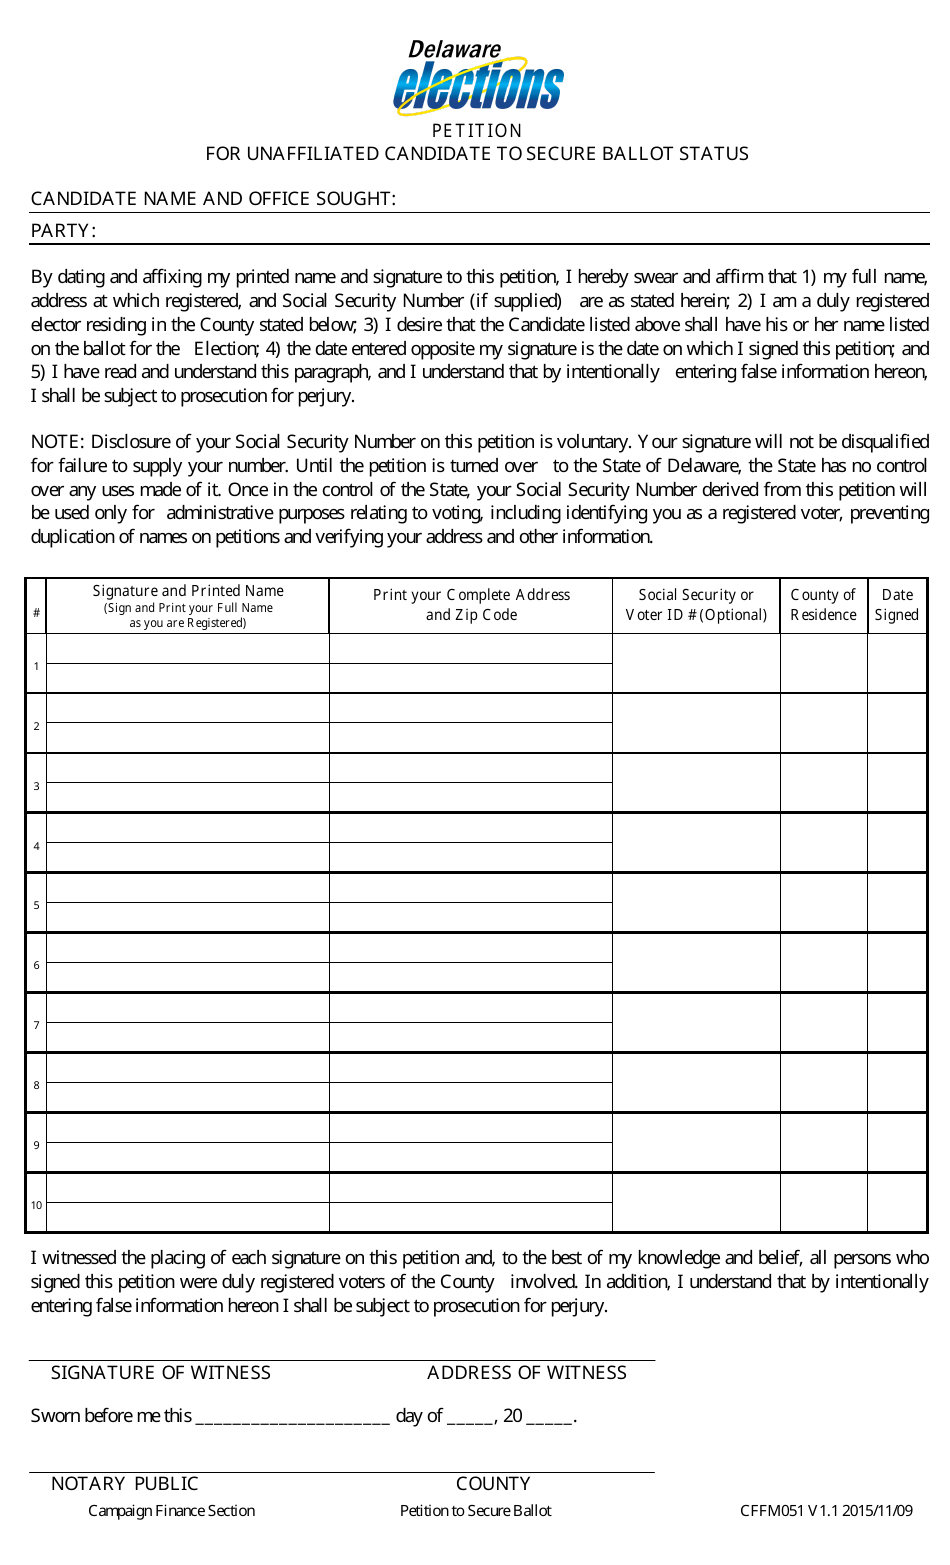 Form CFFM051 Petition for Unaffiliated Candidate to Secure Ballot Status - Delaware, Page 1